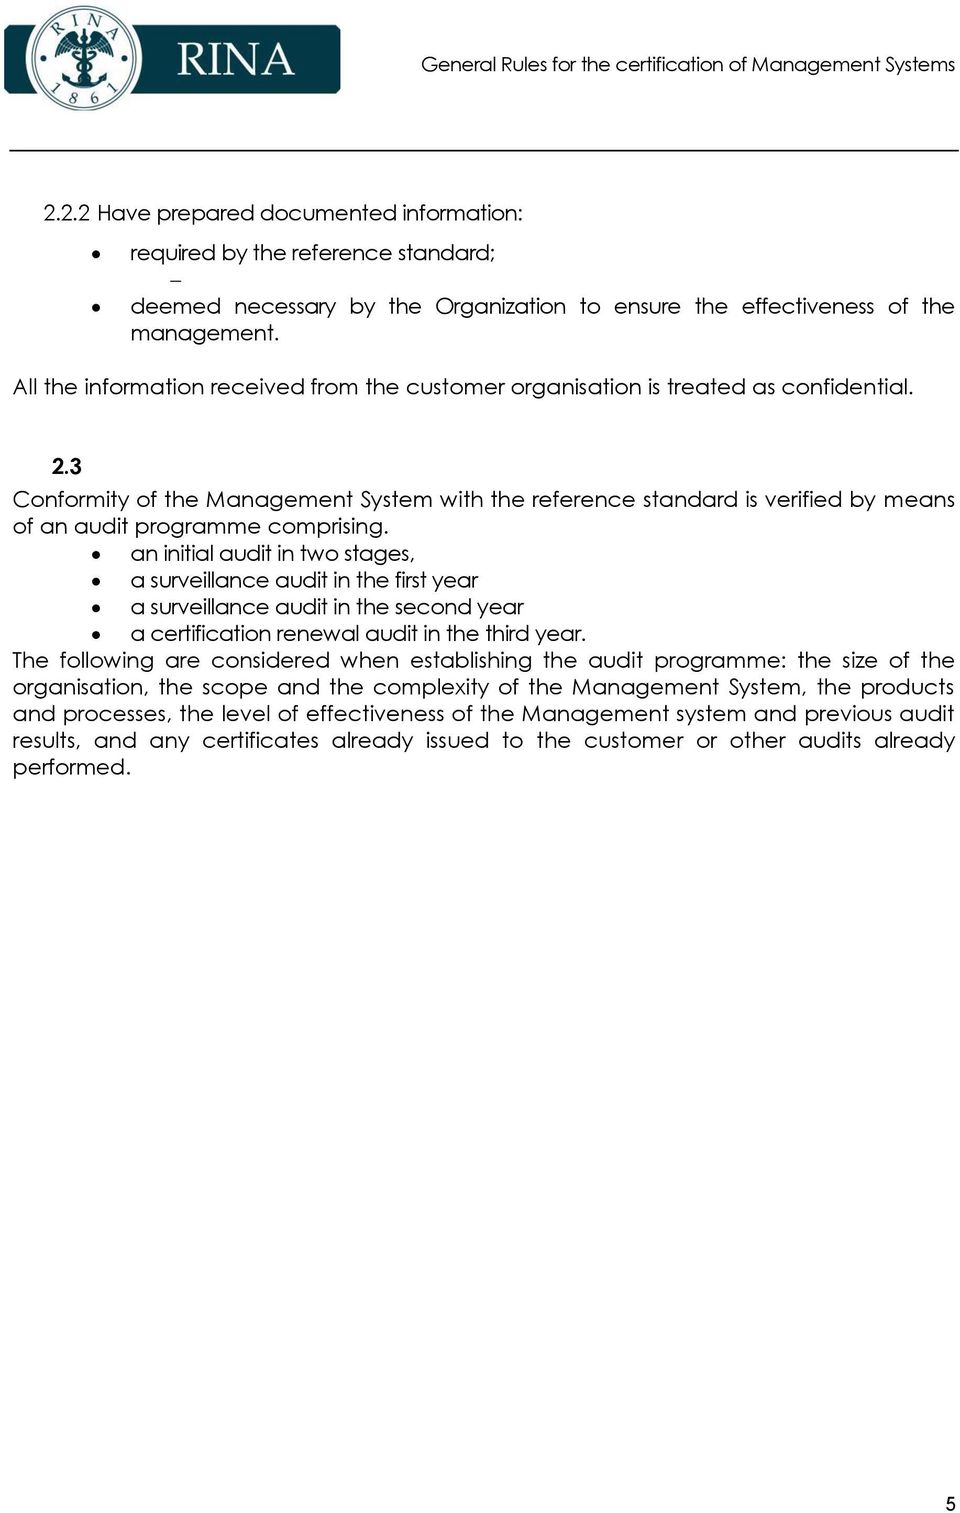 3 Conformity of the Management System with the reference standard is verified by means of an audit programme comprising.